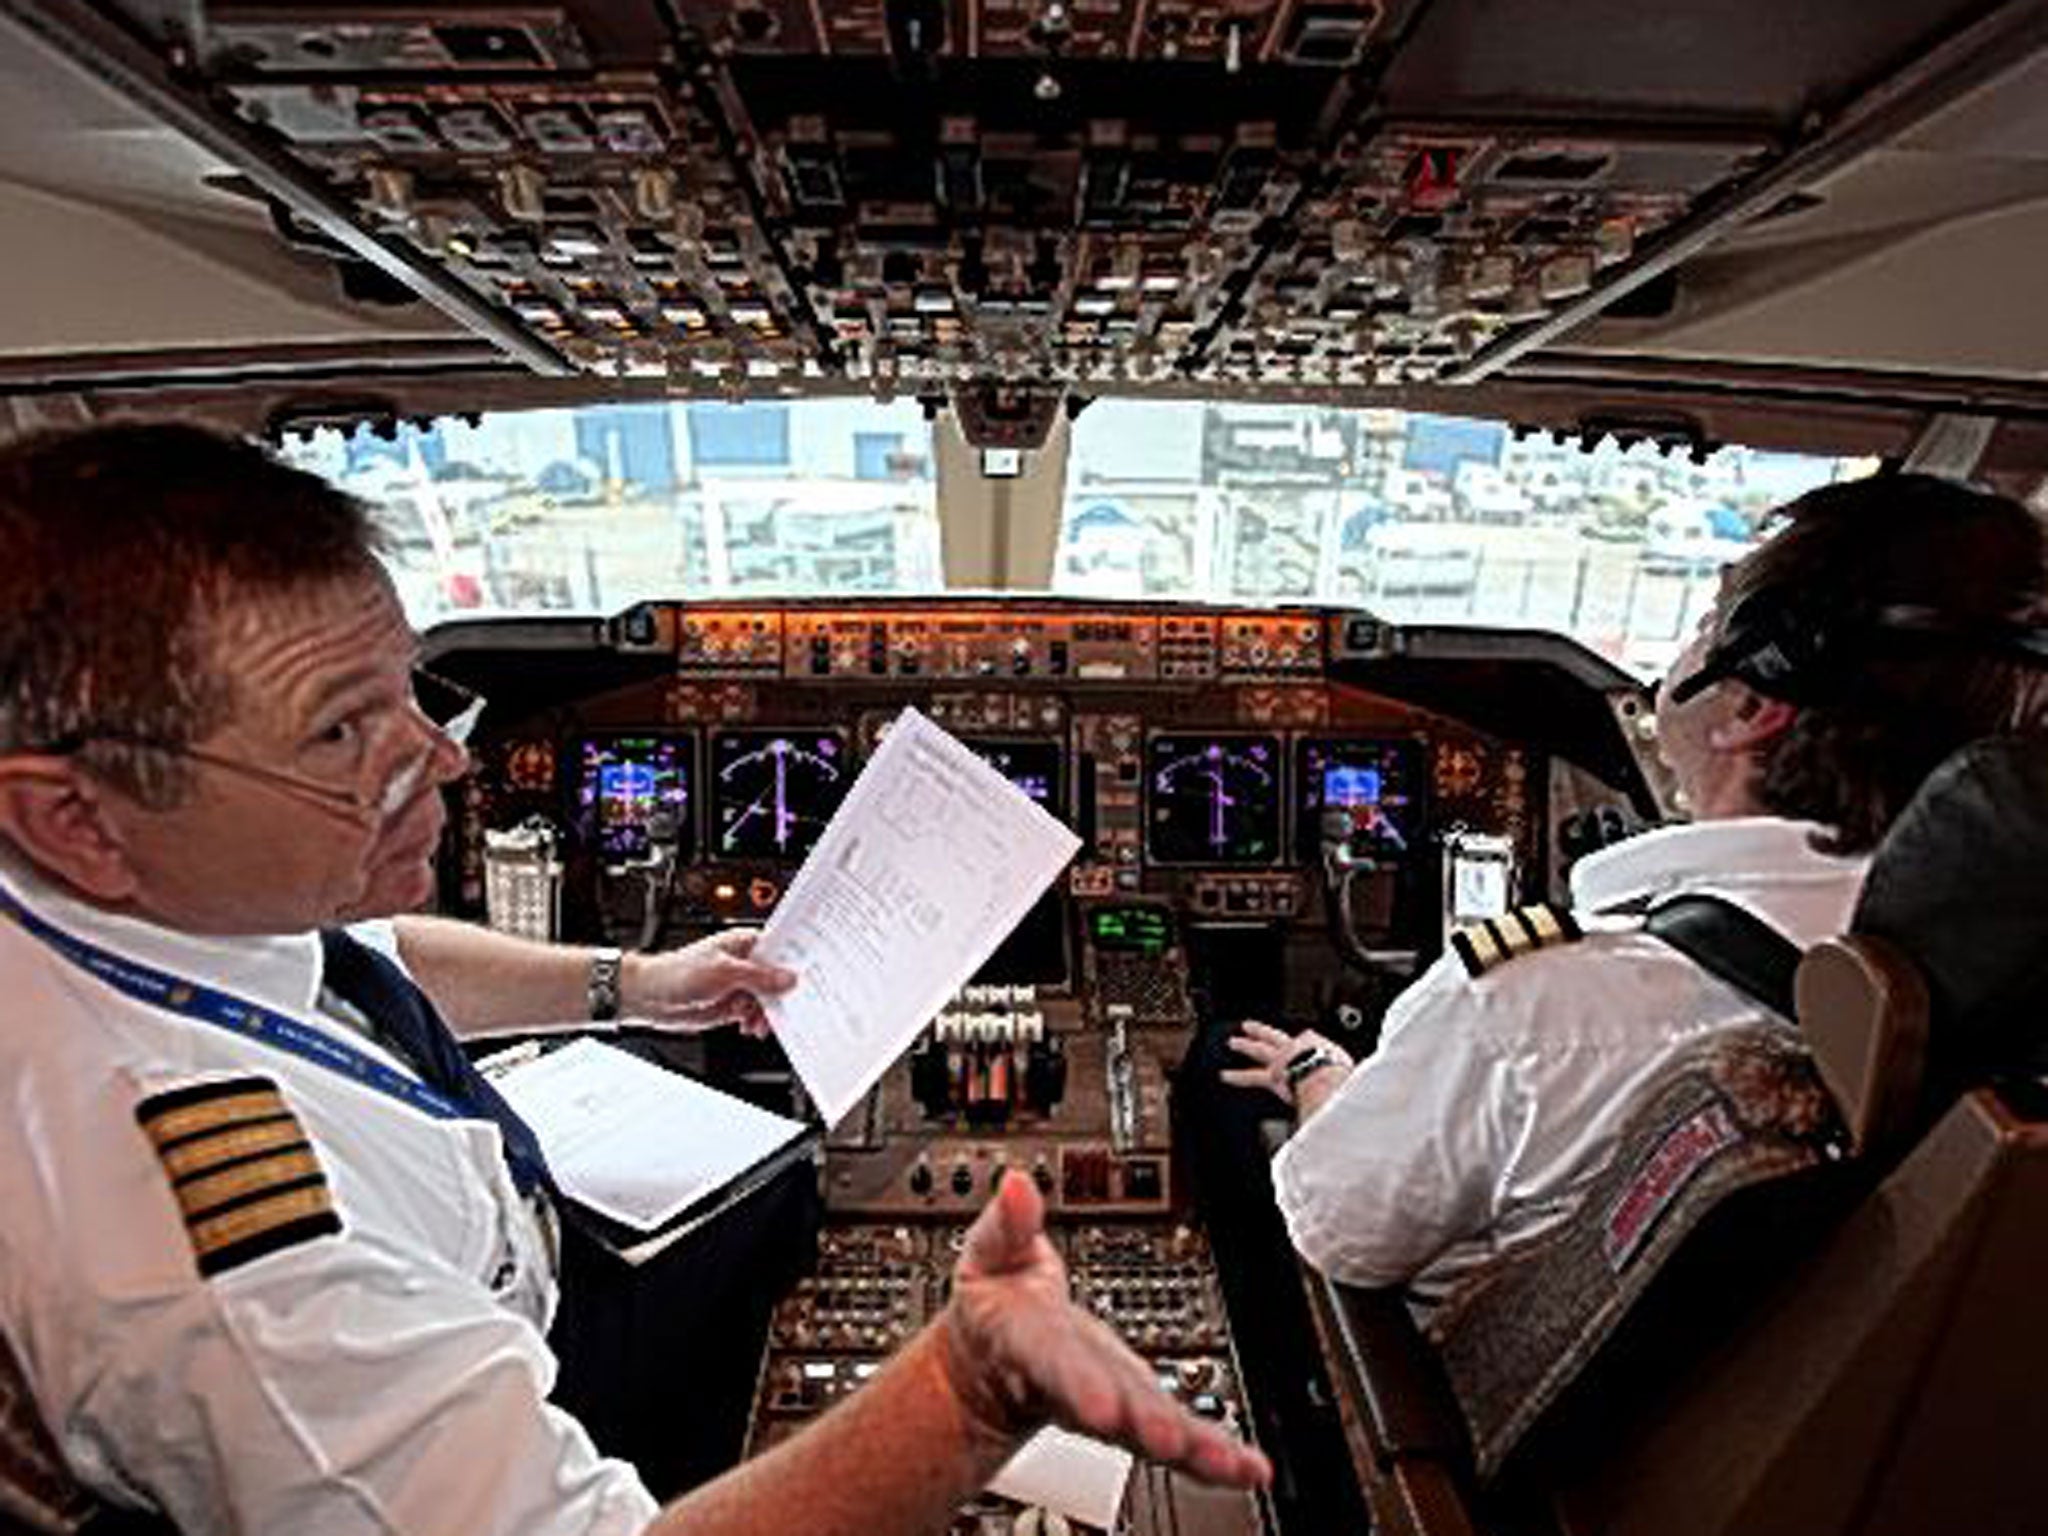 Cockpit safety will be a big issue in 2014